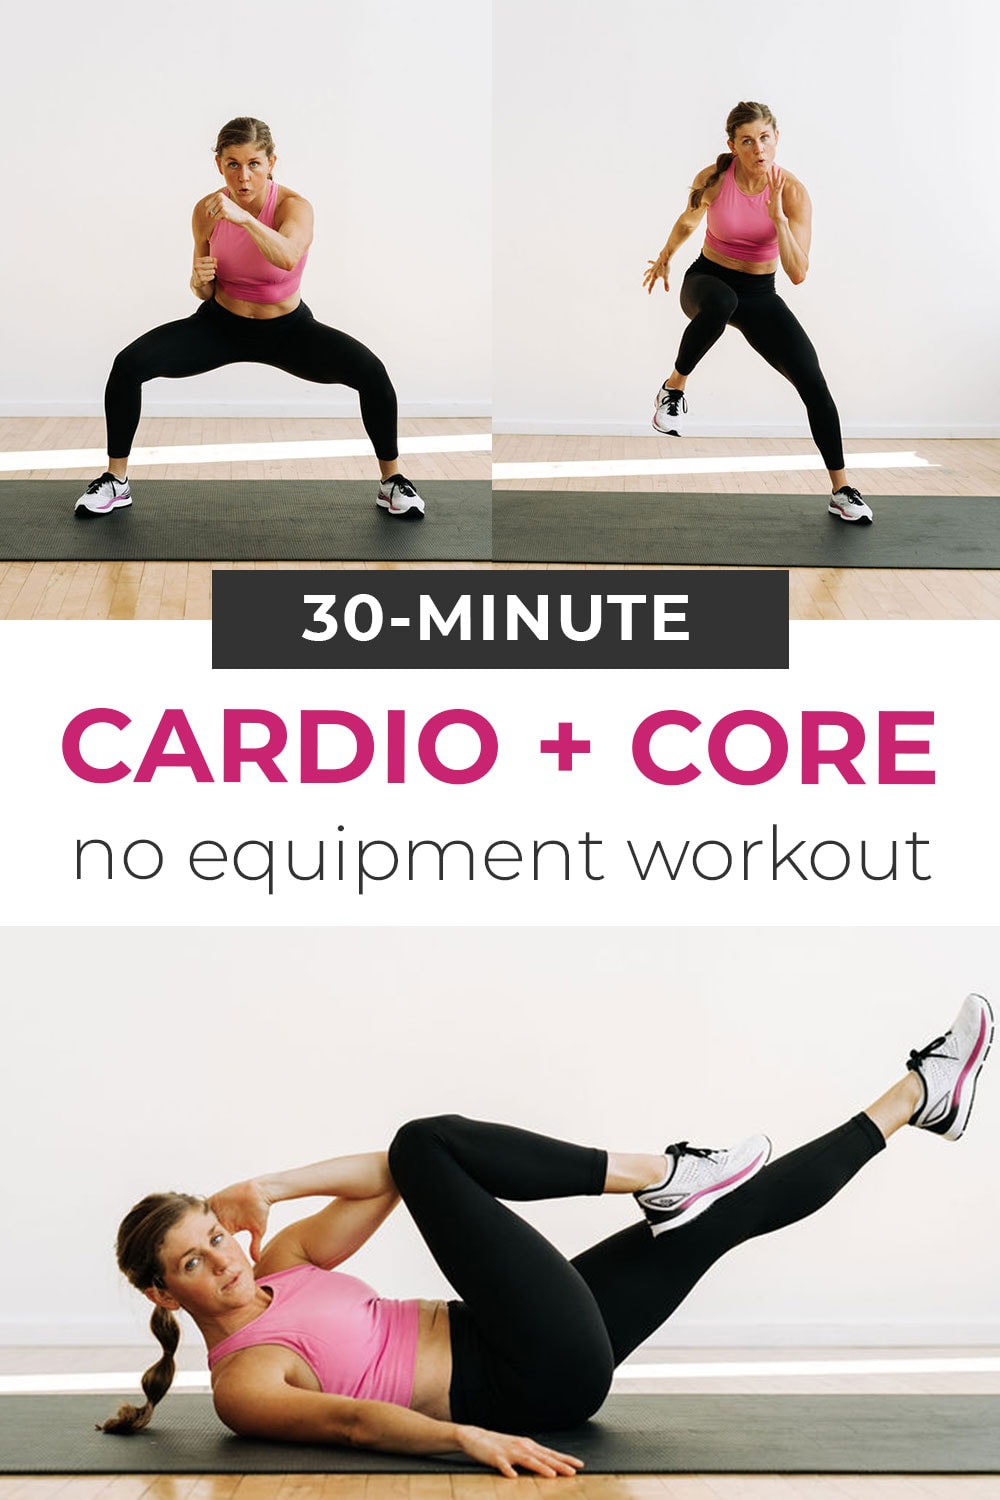 30-Minute Cardio and Core Workout At Home (Video) | Nourish Move Love